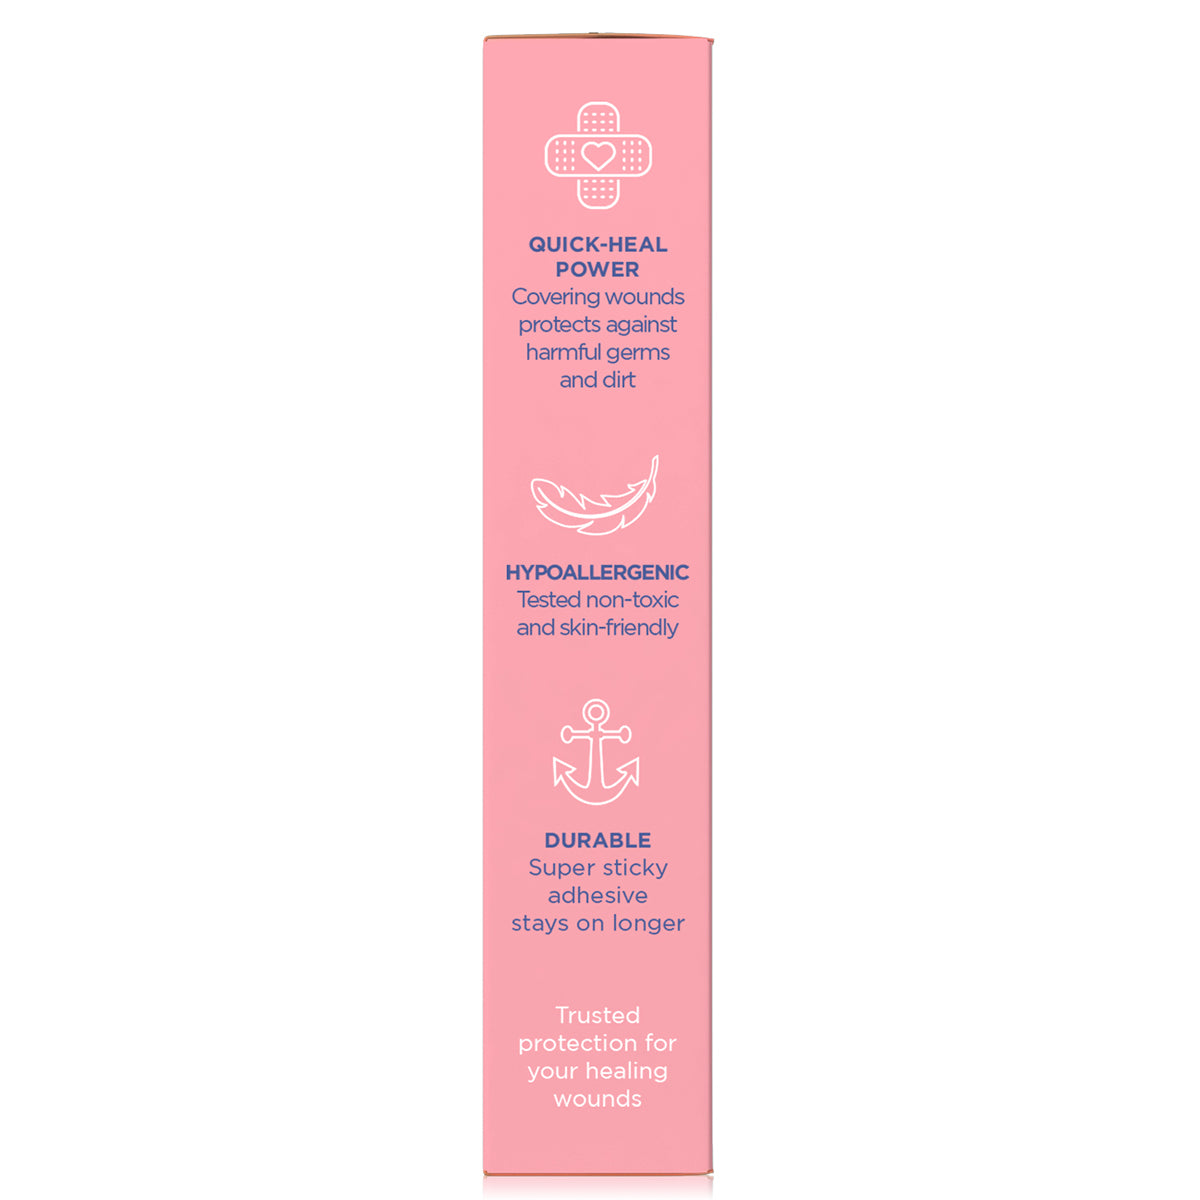 'Ouchie Printed Bandages'  Combo Pack of 3 (20 x 3 =60) (Pink)